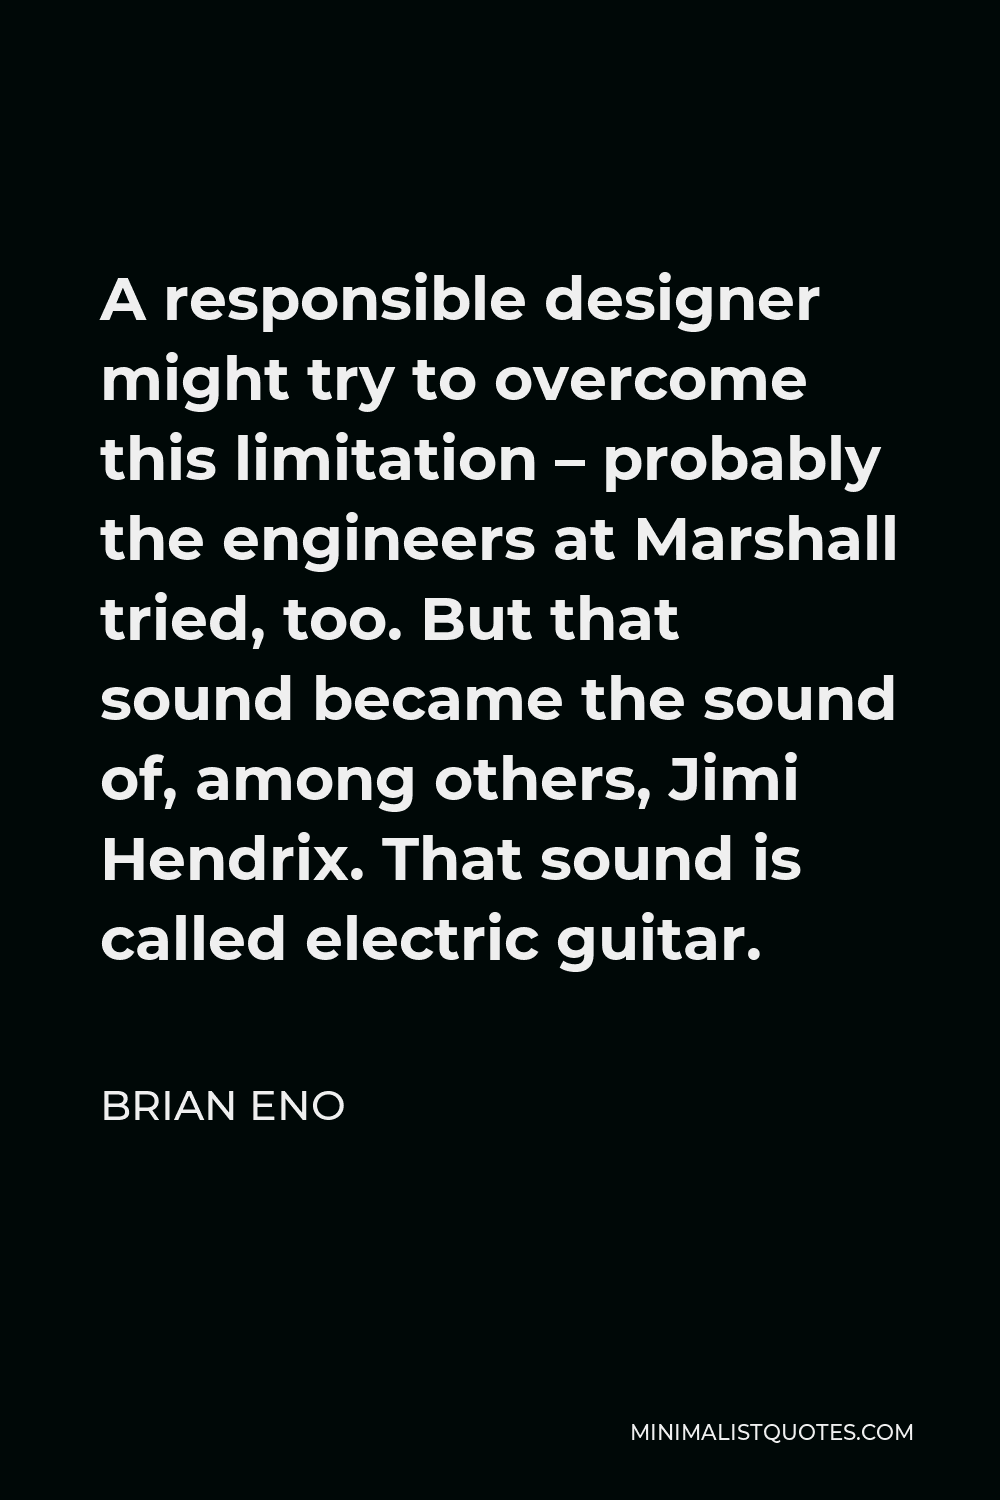 Brian Eno Quote - A responsible designer might try to overcome this limitation – probably the engineers at Marshall tried, too. But that sound became the sound of, among others, Jimi Hendrix. That sound is called electric guitar.